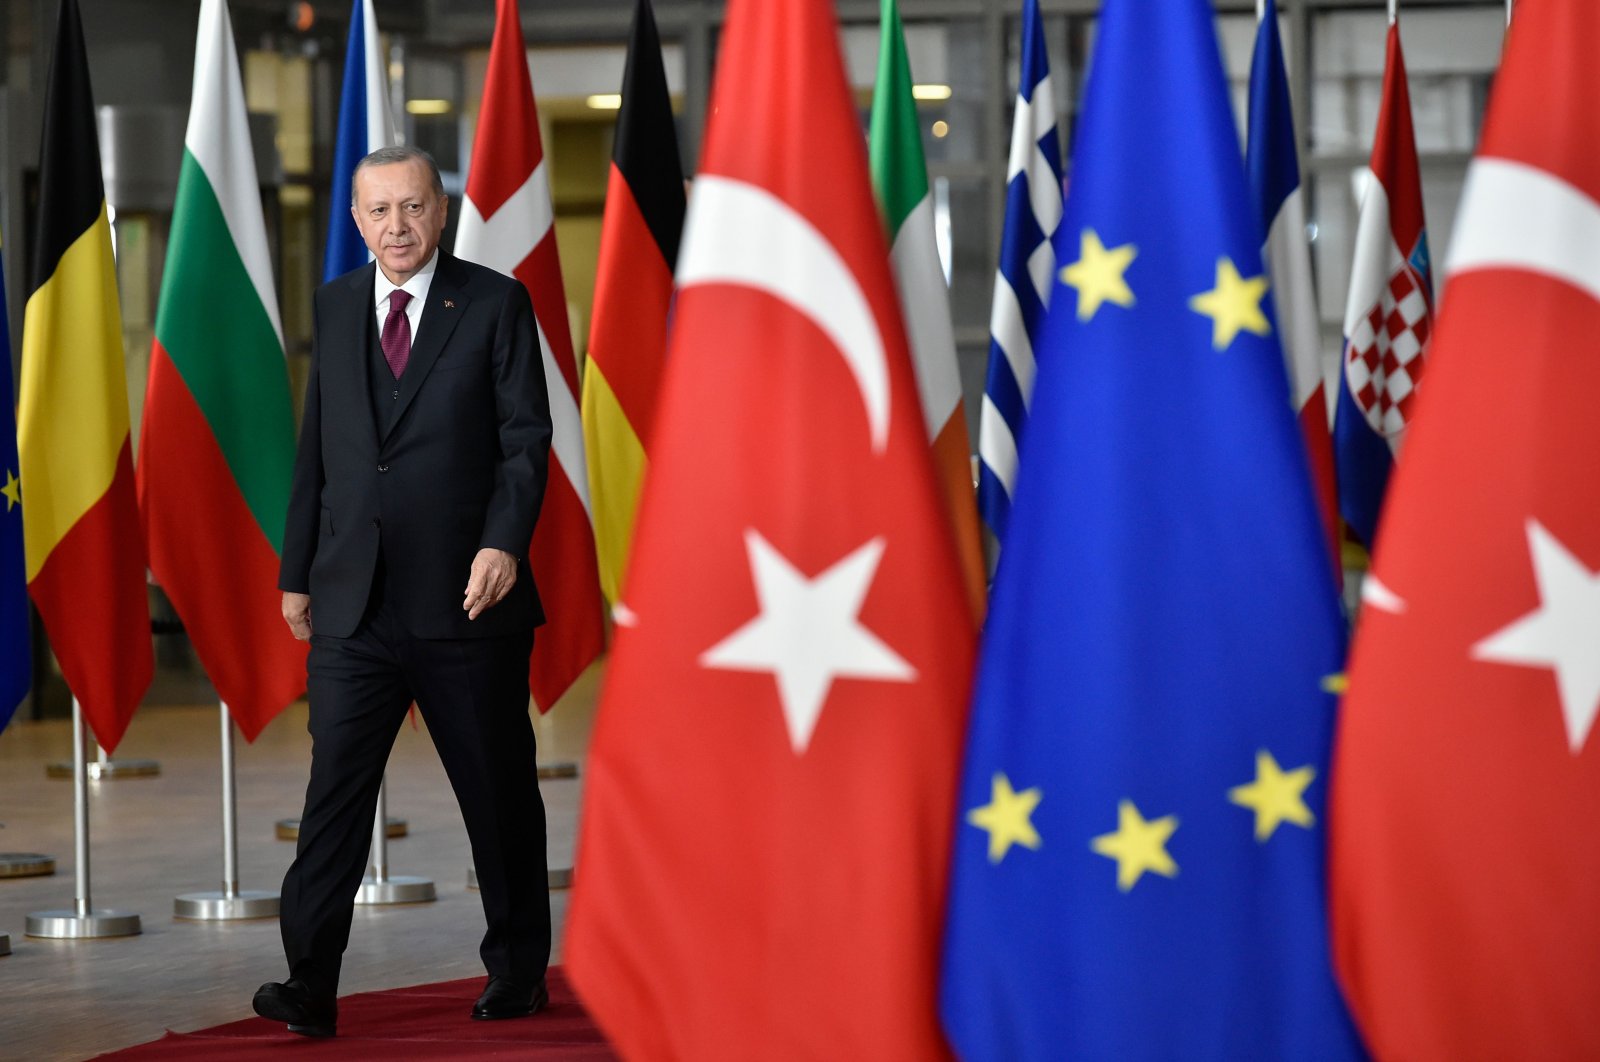 President Recep Tayyip Erdoğan arrives before a meeting with European Commission President and EU Council President at the EU headquarters in Brussels, March 9, 2020. (AFP Photo)